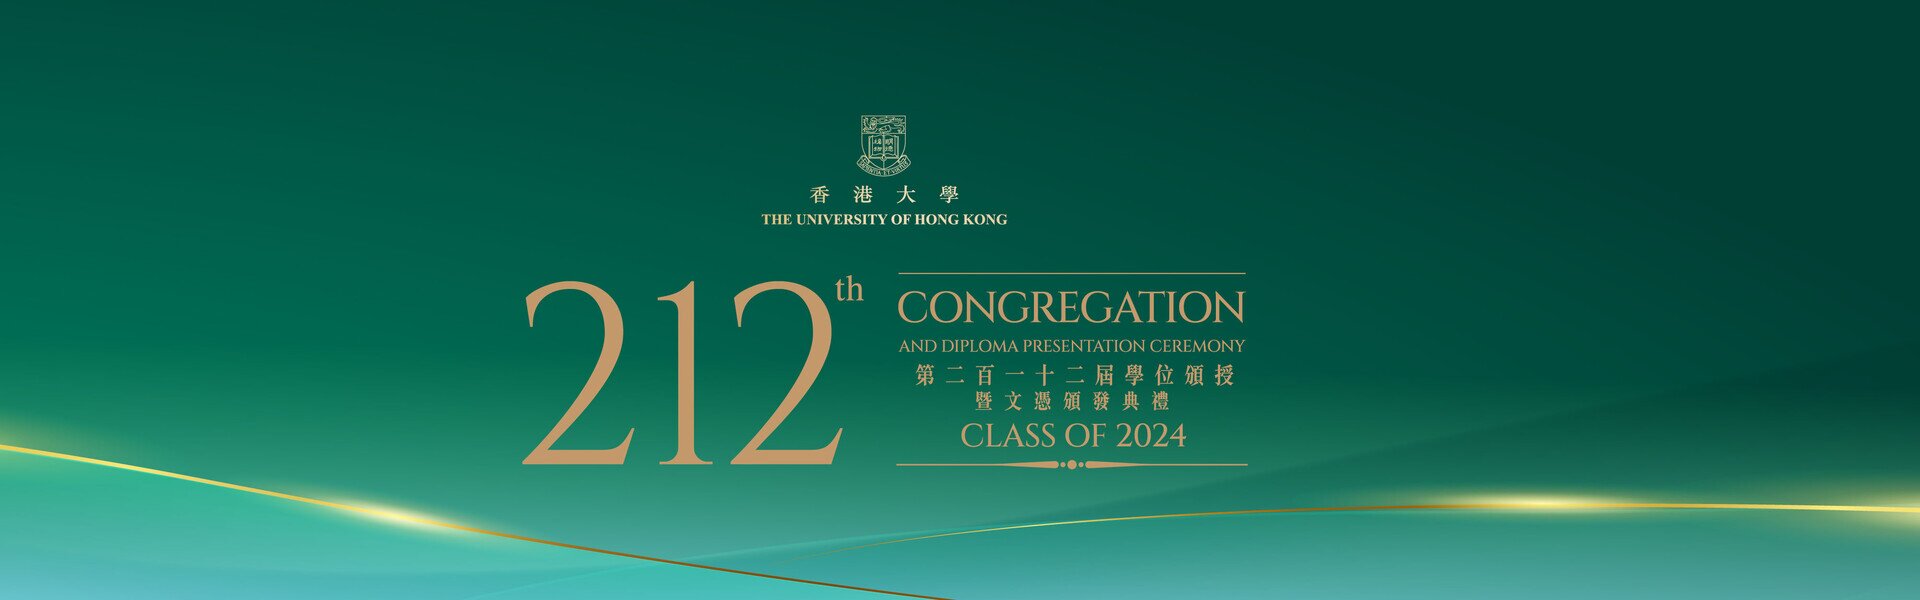 212th Congregation and Diploma Presentation Ceremony